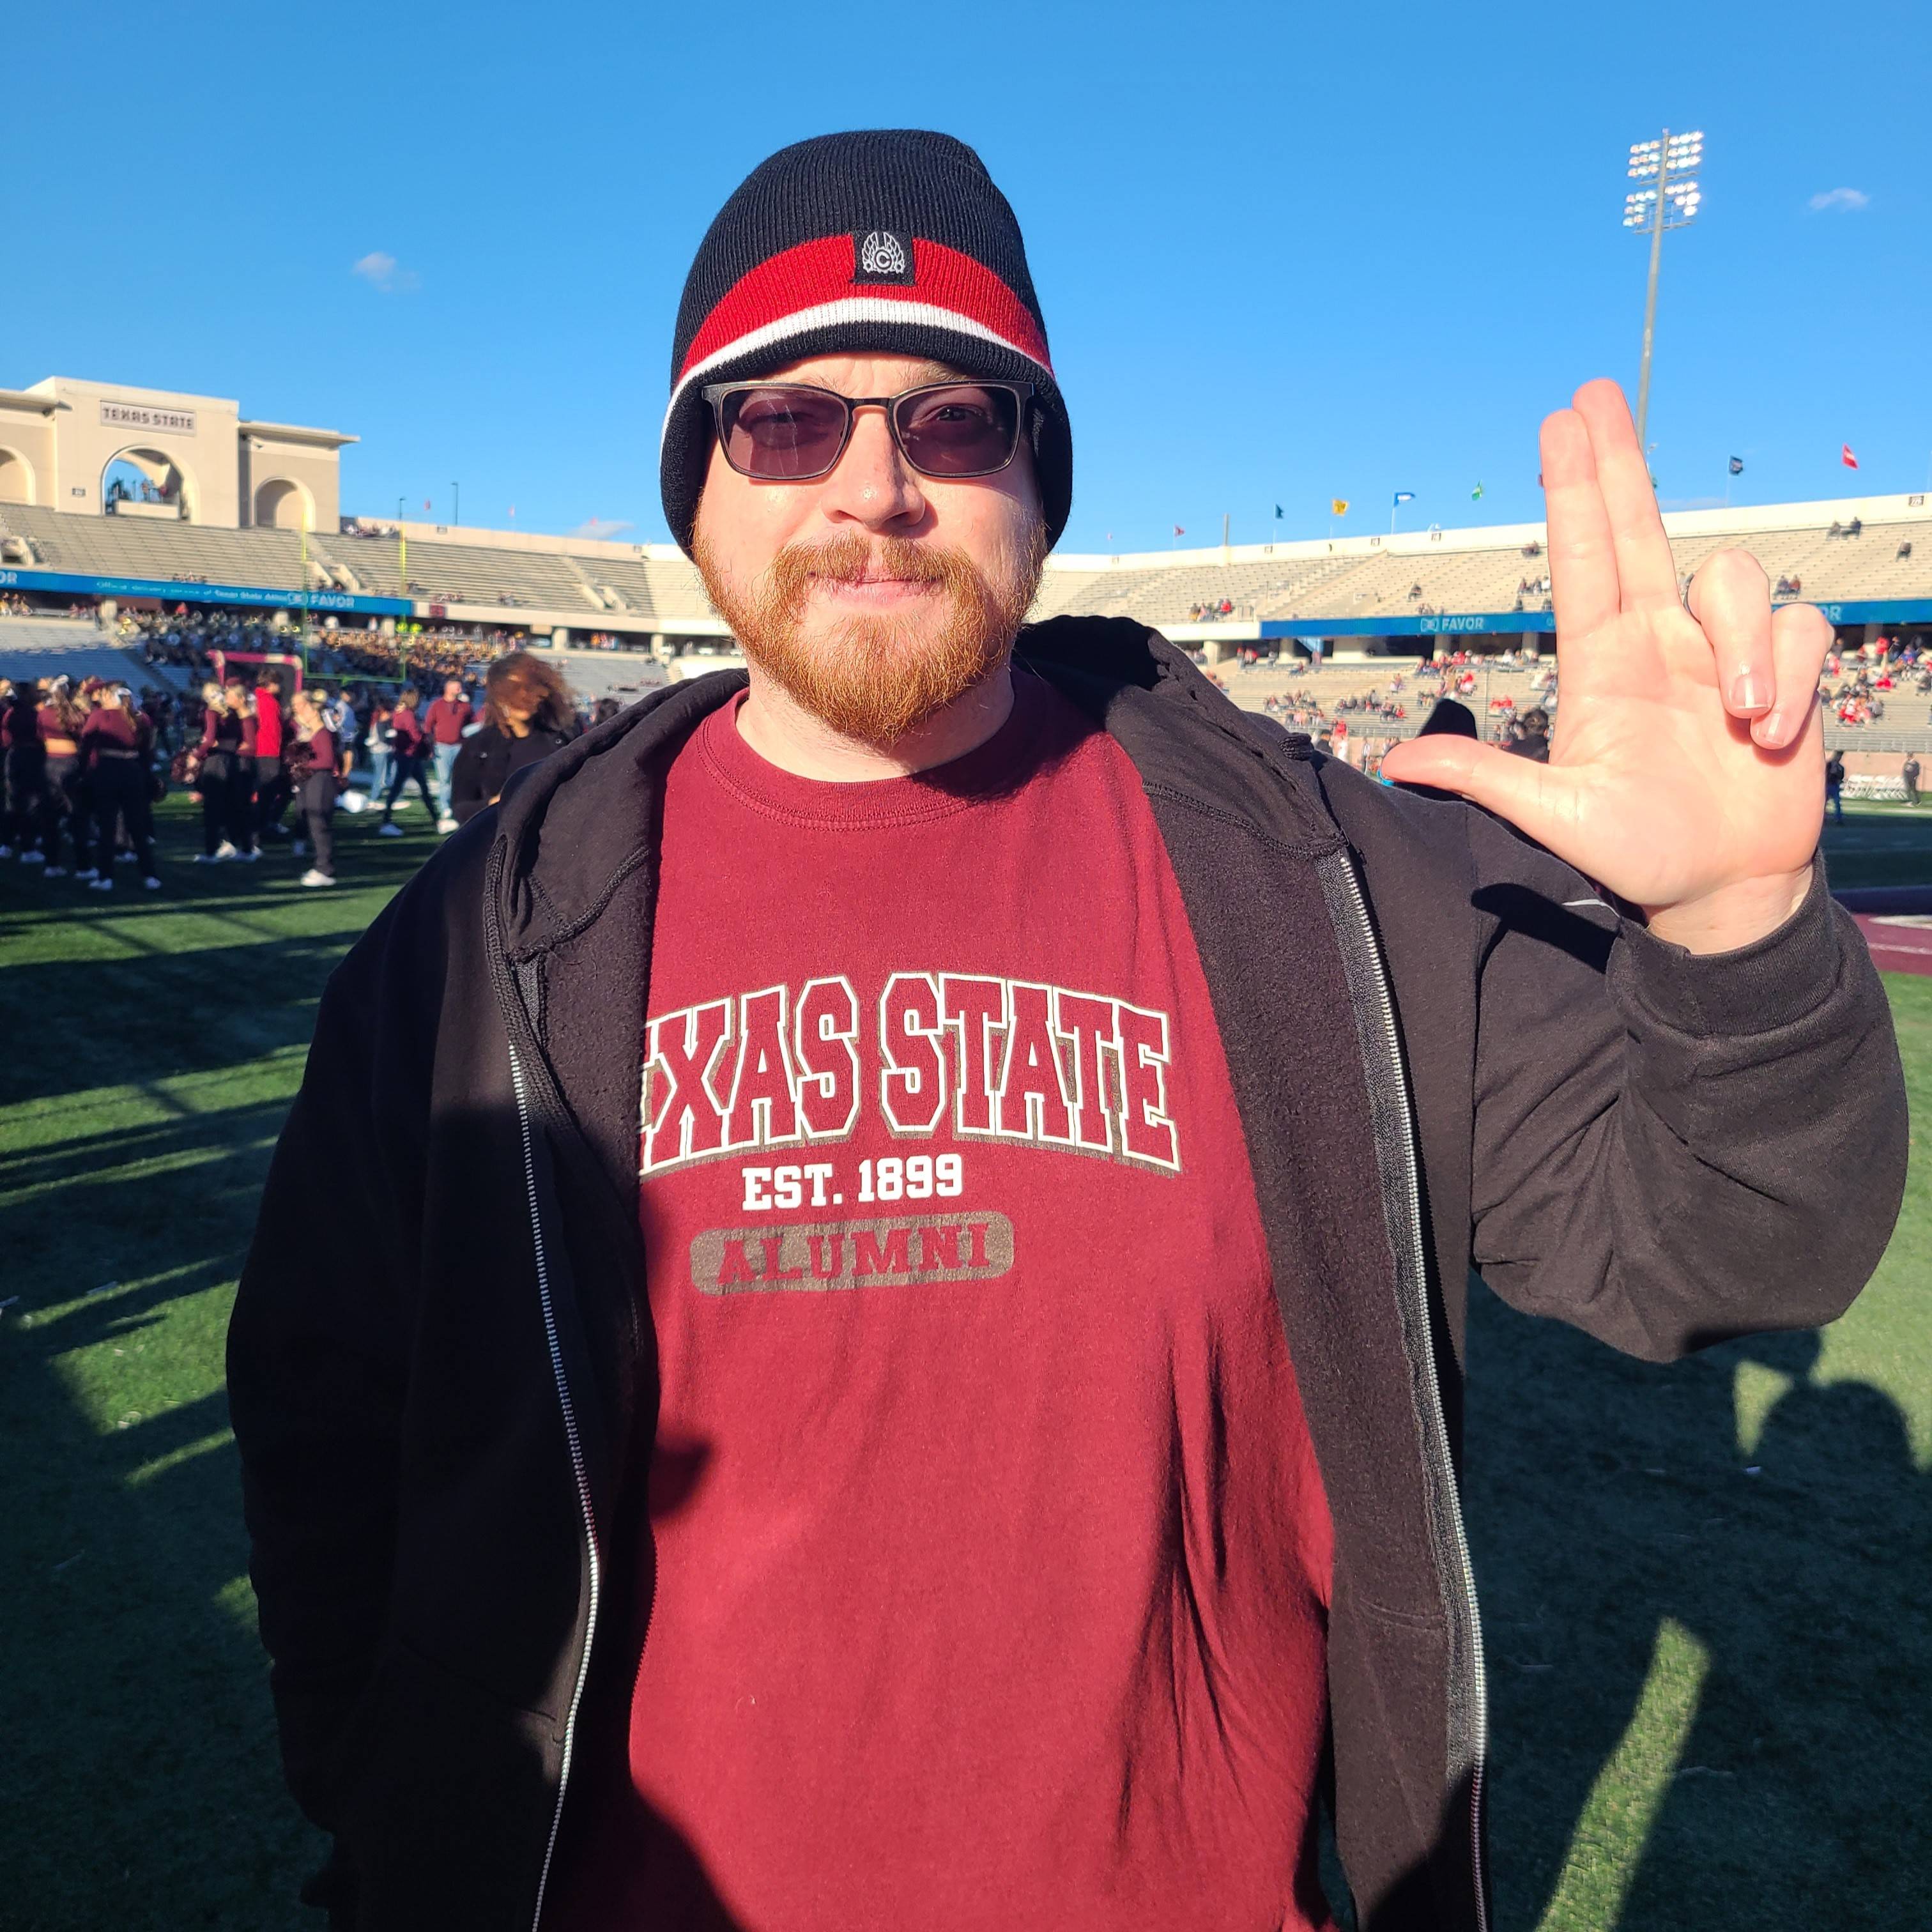 Mark Moore wearing a maroon TXST t-shirt, with a black hoodie, and a black and red beanie while holding up the TXST hand symbol with his left hand on a football field